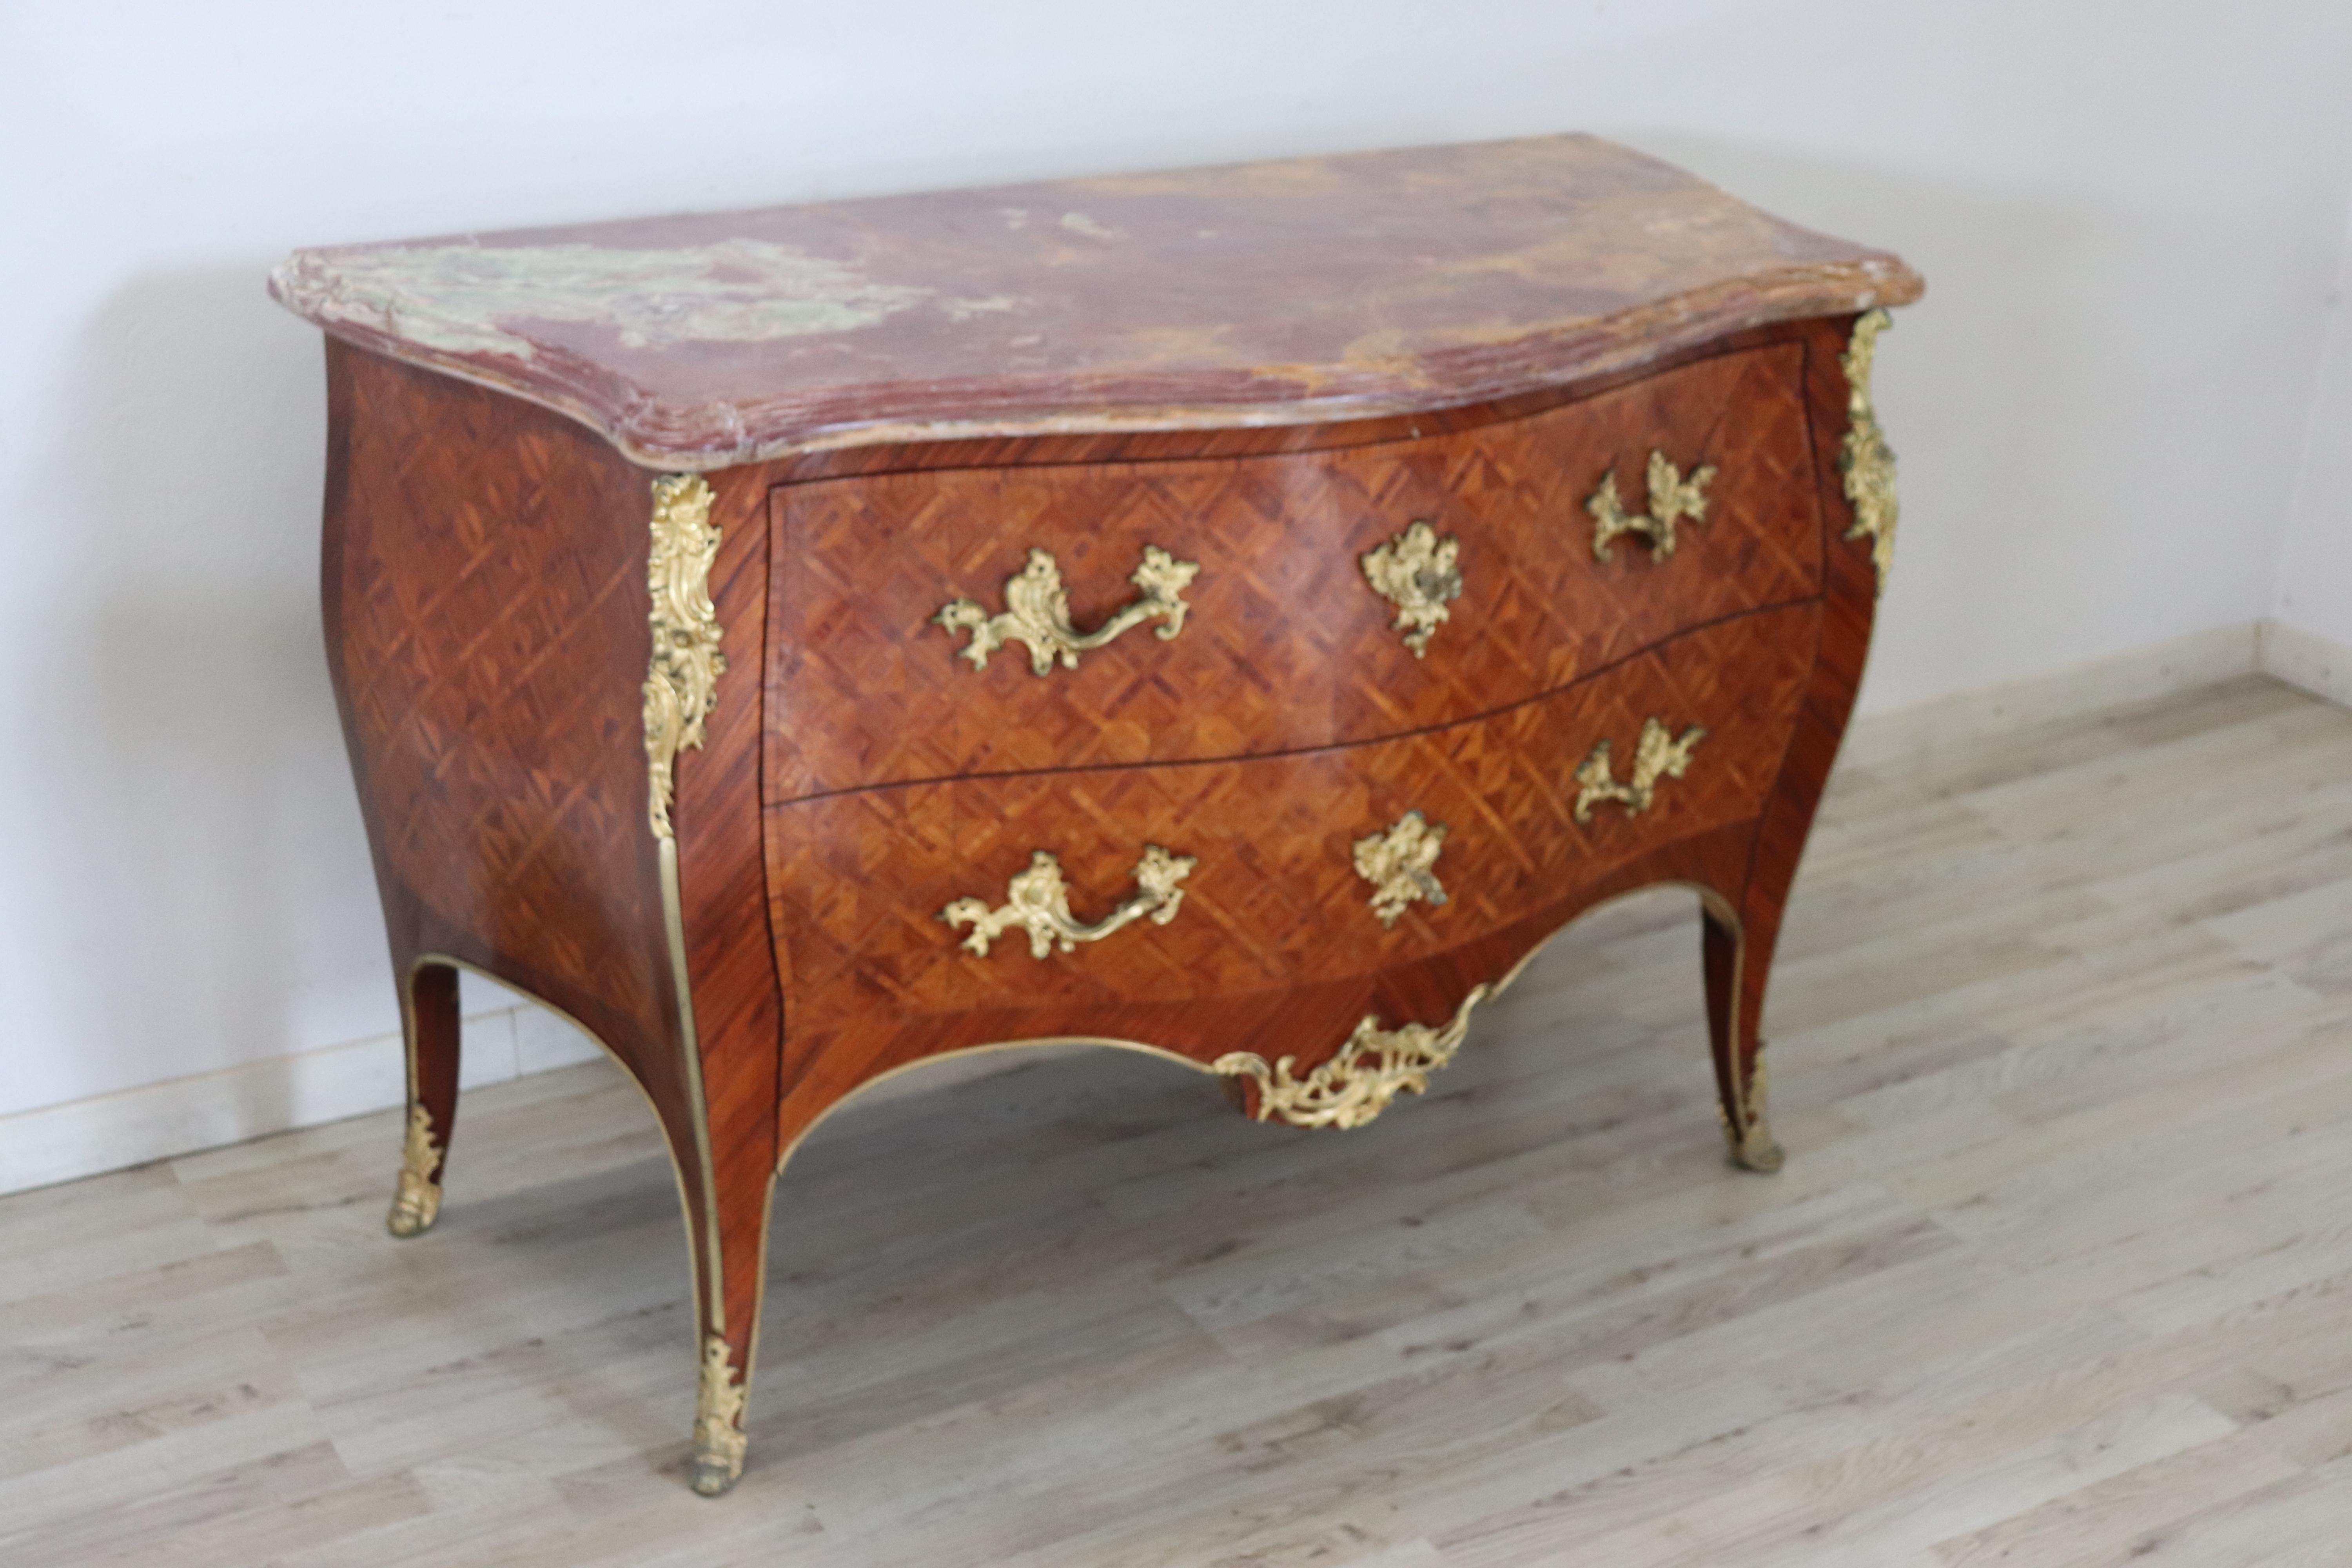 Spectacular antique French chest of drawers in precious rosewood. The line is typical of the Louis XV style with elegant wavy legs. Rich decoration in finely chiseled gilded bronze makes this chest even brighter. The particular rounded front has two